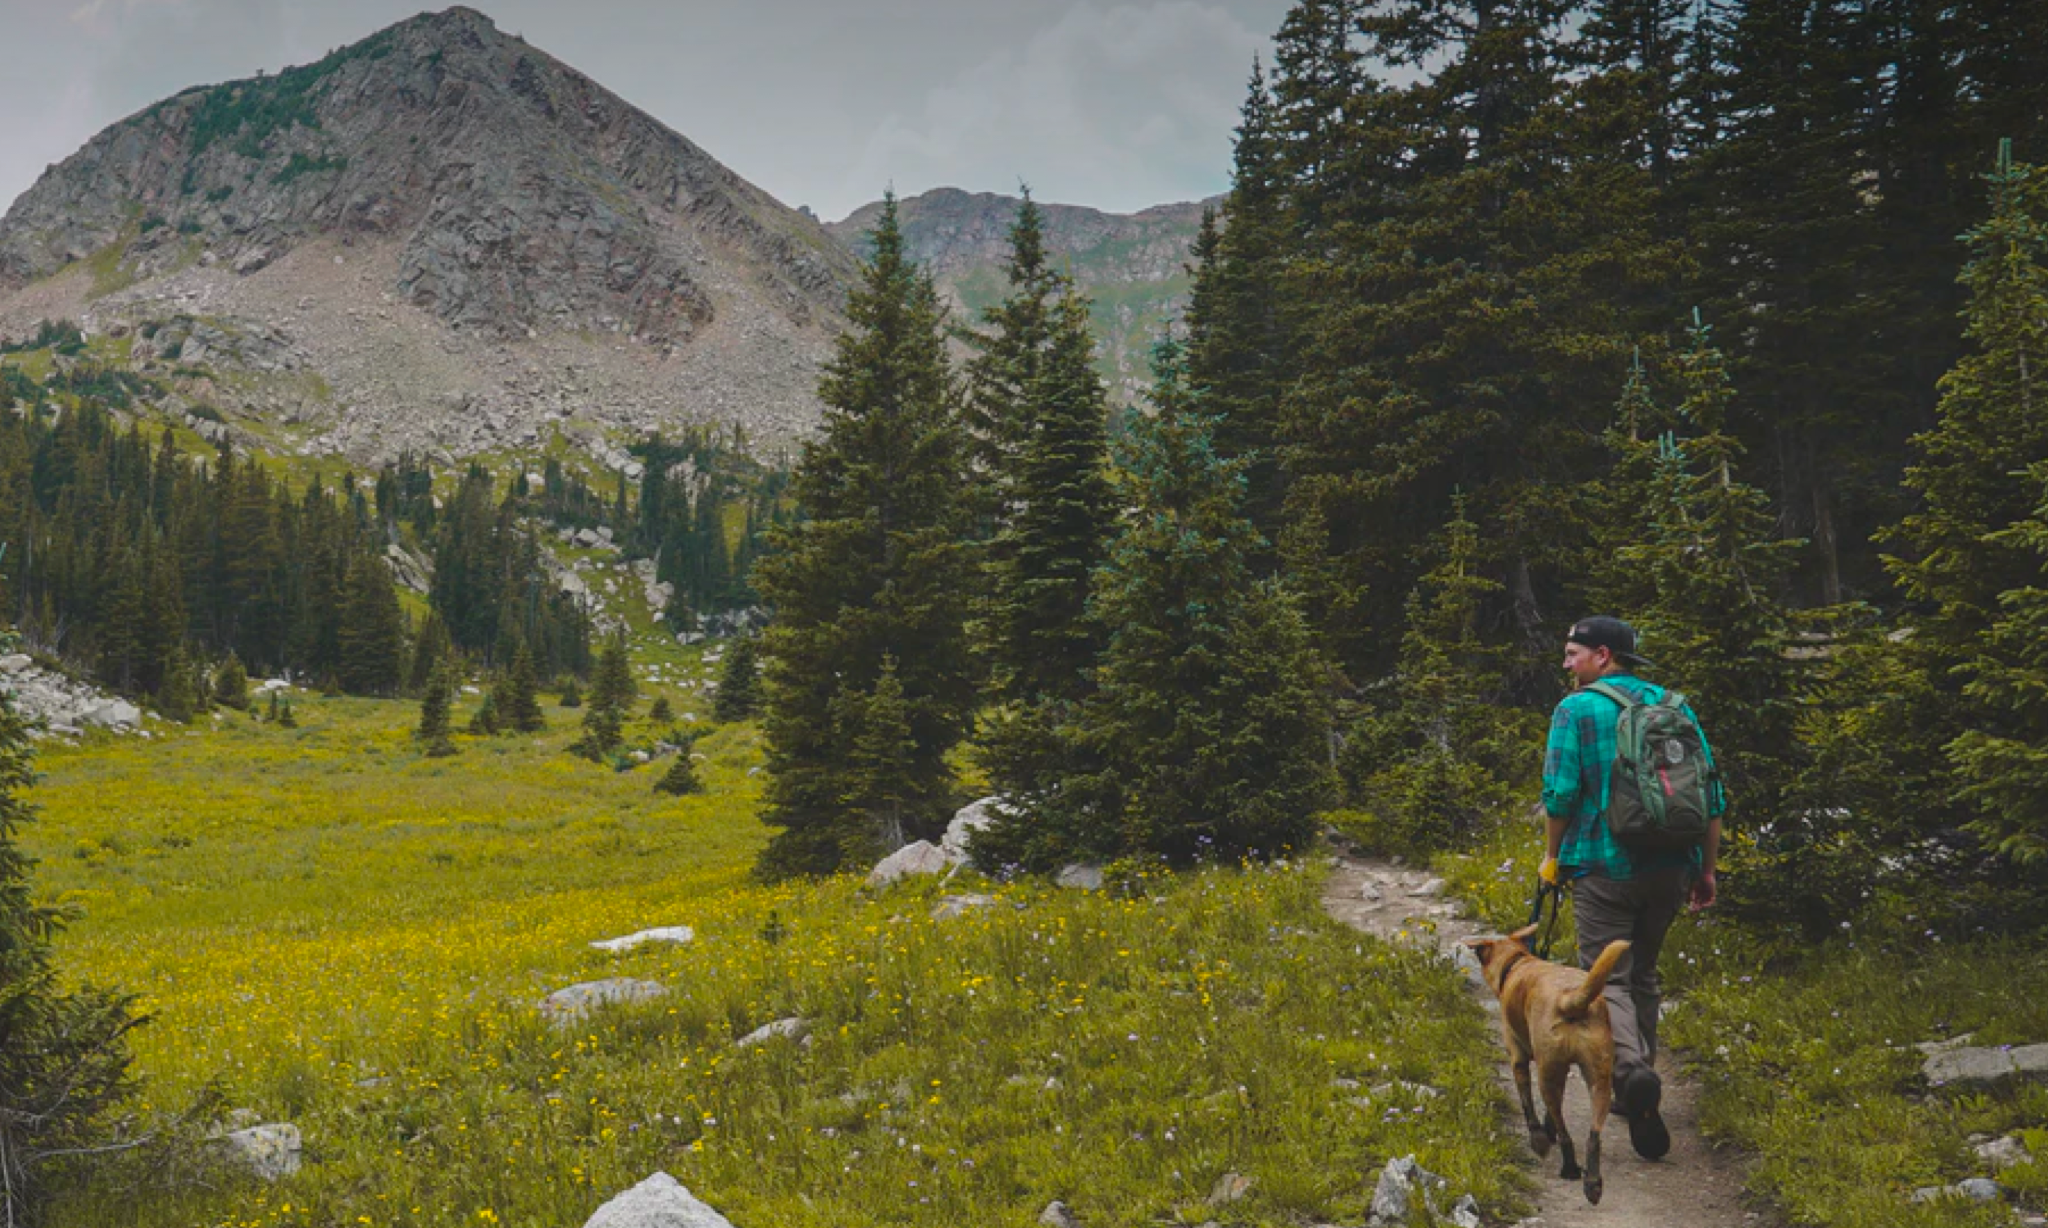 A man hikes along a trail in the mountains with his dog by his side.